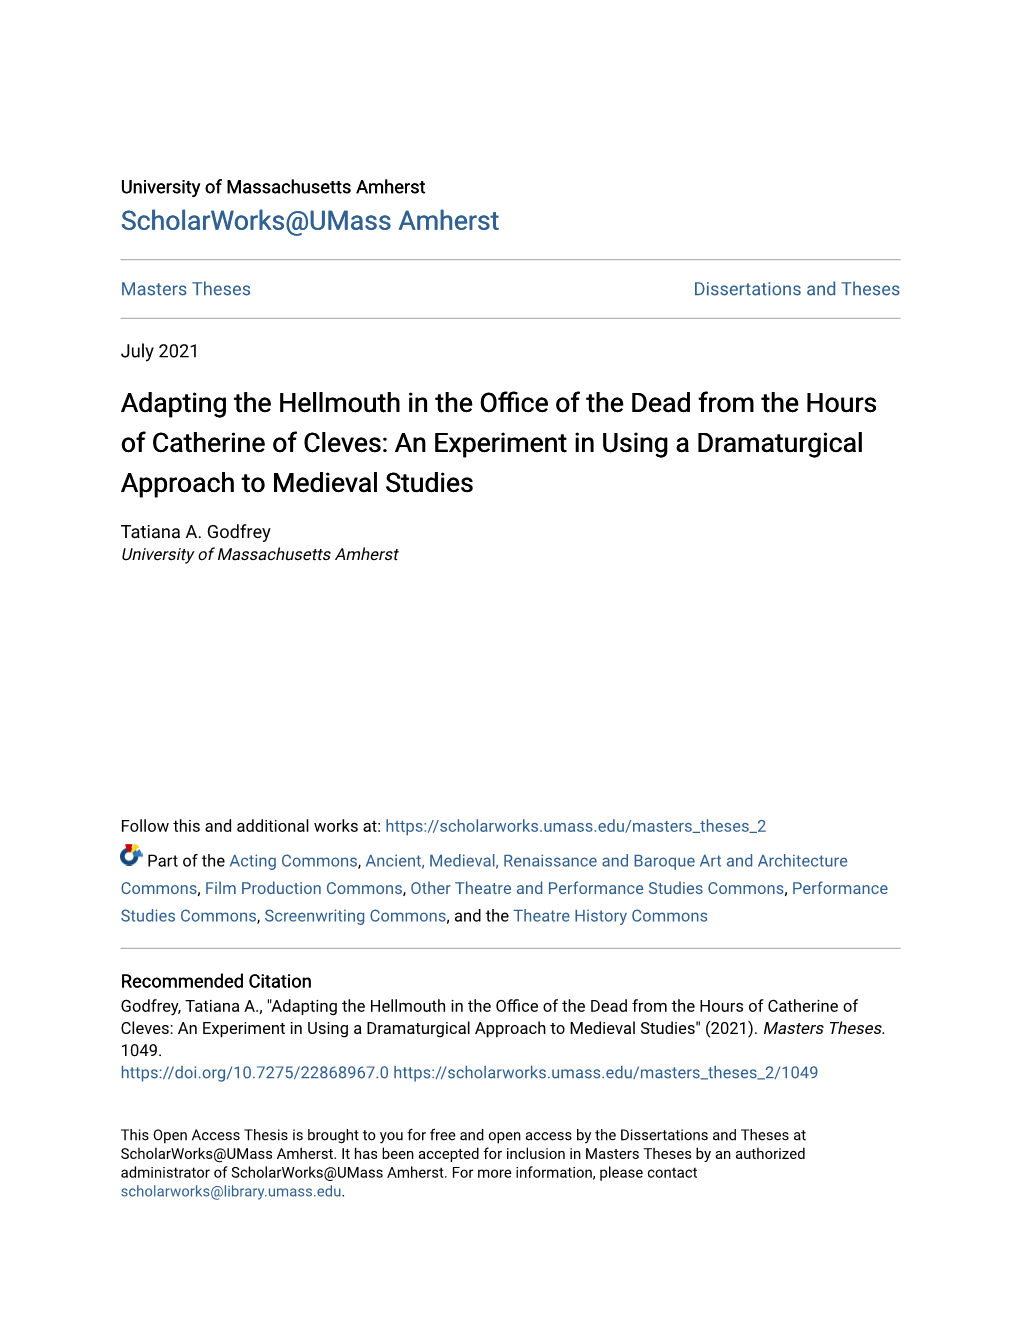 Adapting the Hellmouth in the Office of the Dead Omfr the Hours of Catherine of Cleves: an Experiment in Using a Dramaturgical Approach to Medieval Studies